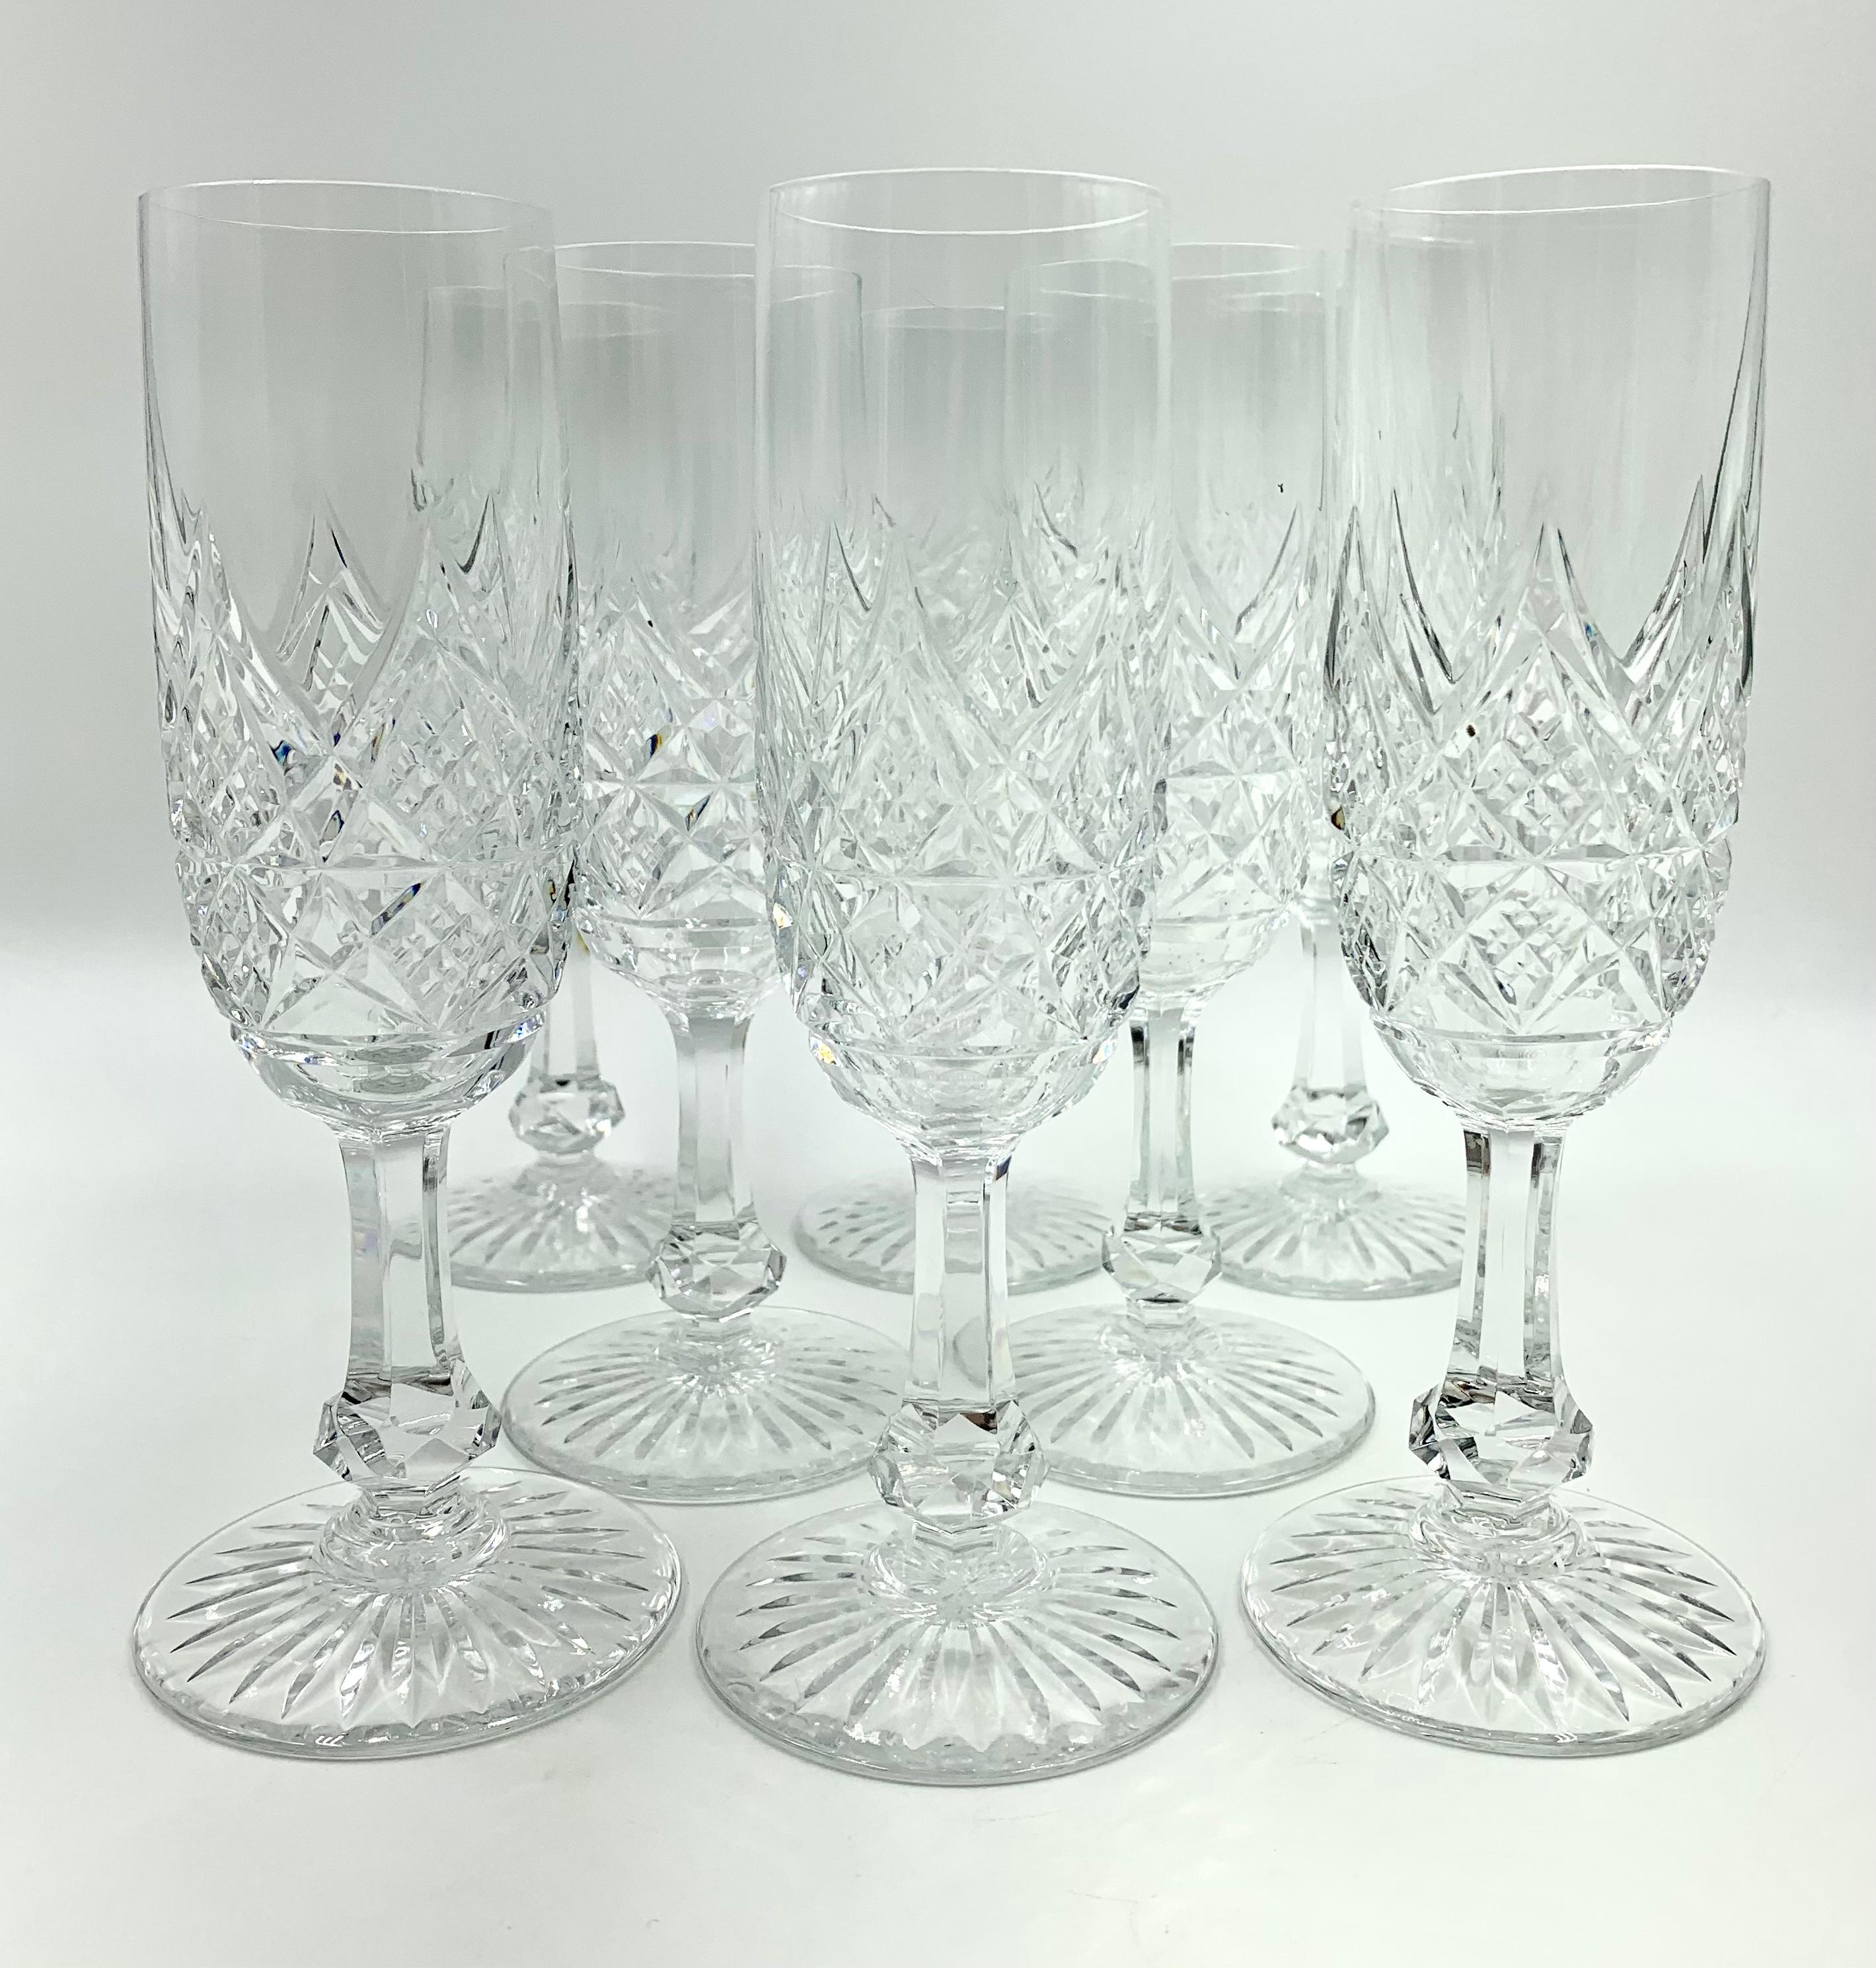 Rare Luxurious 24 Piece Baccarat Colbert Stemware Service for Eight For Sale 1